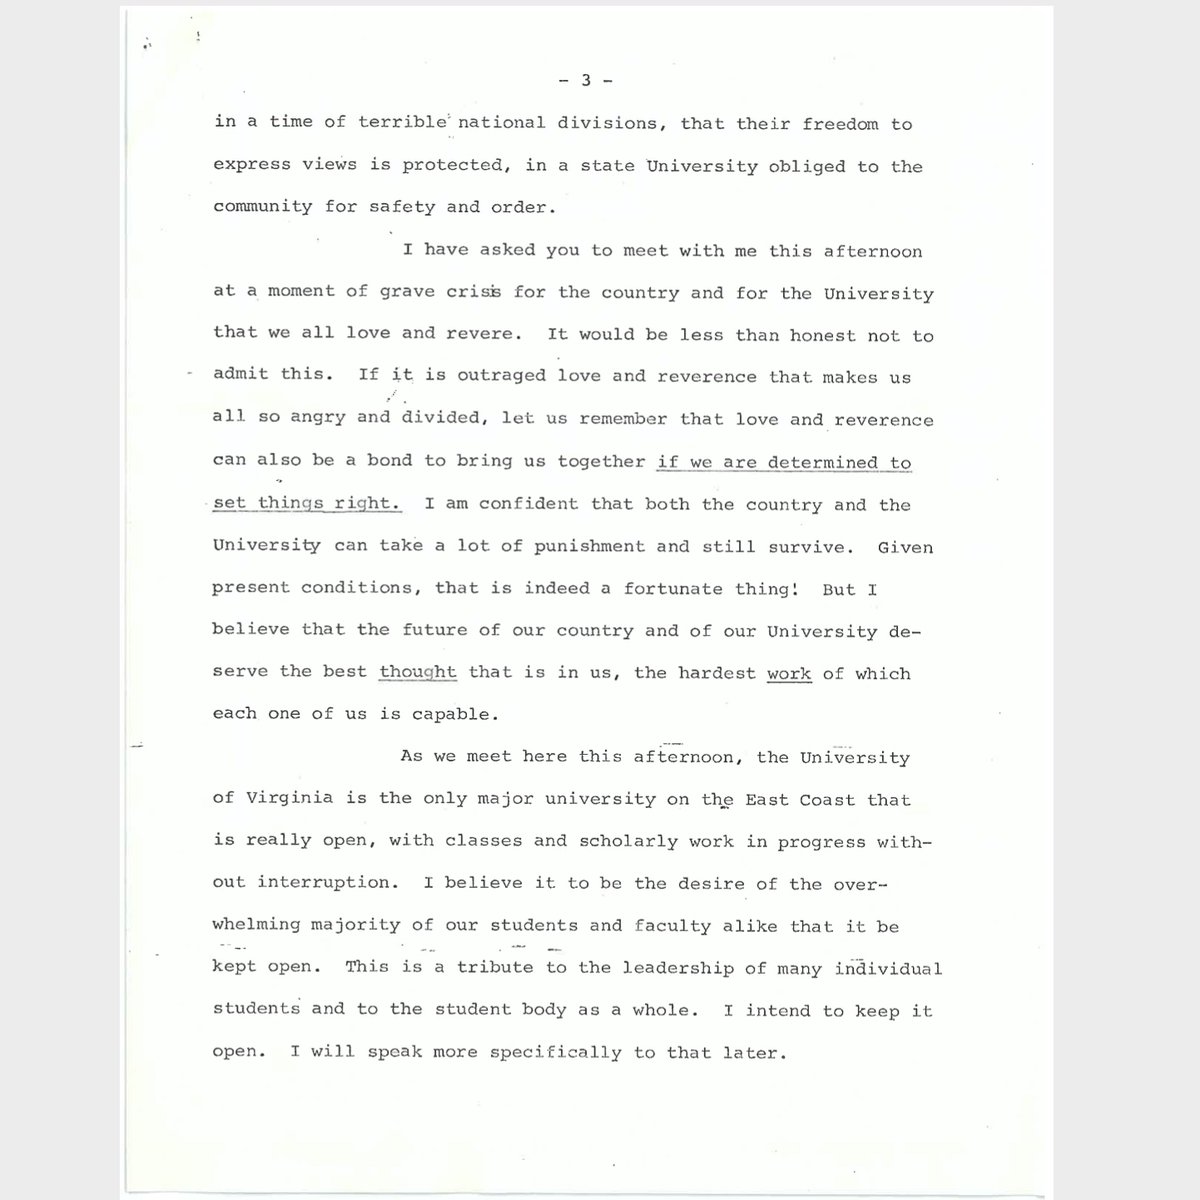 The first few pages from copy of Shannon's speech from the Papers Concerning the UVA Strike Committee (a great May Strike collection aggregated by Atcheson Hench):  https://search.lib.virginia.edu/catalog/u4235564